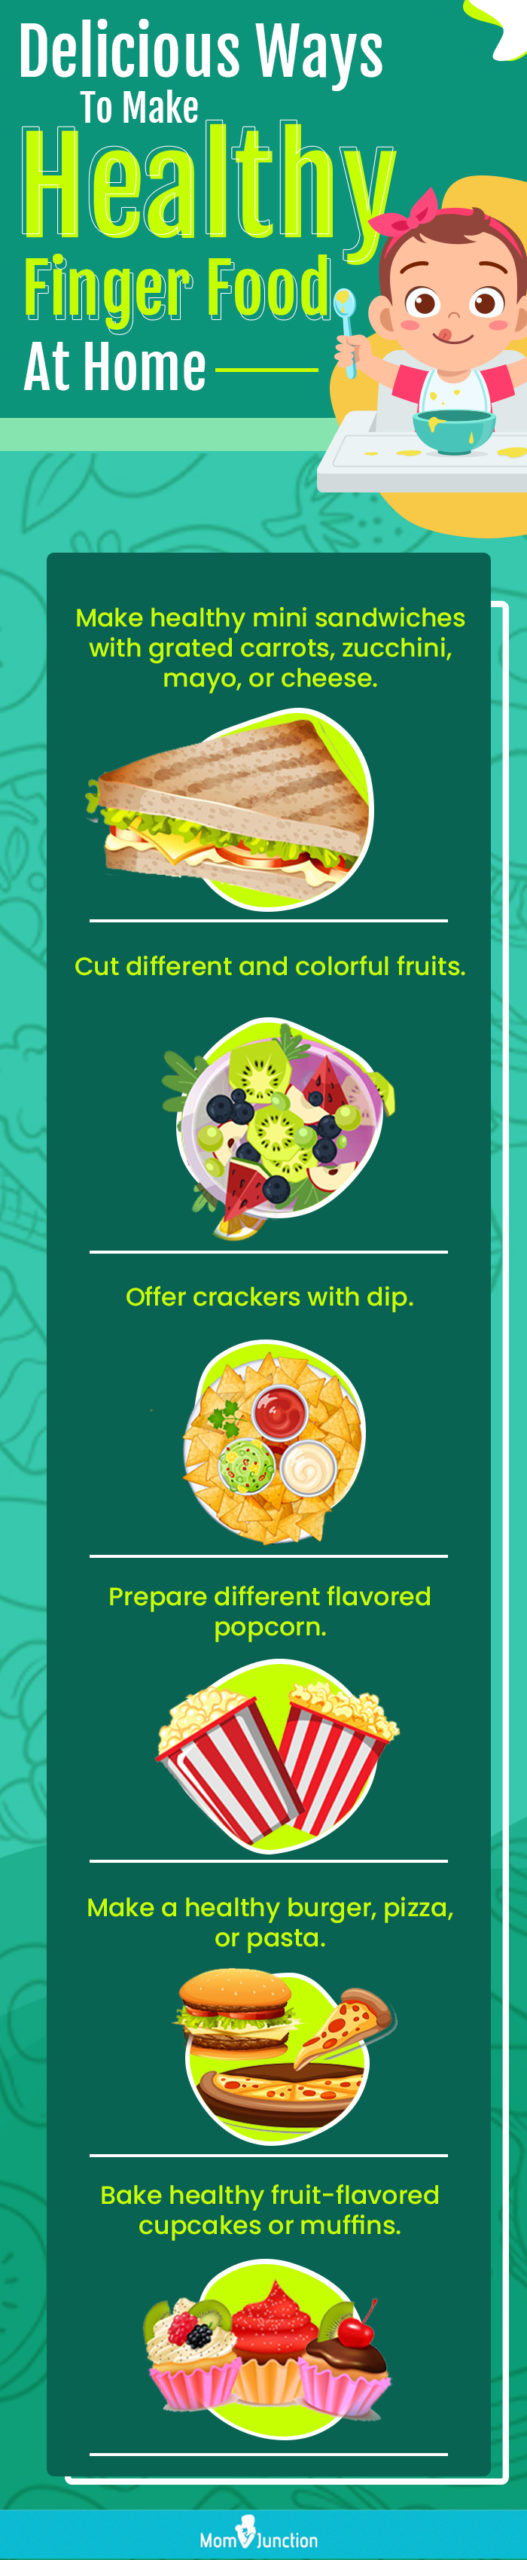 delicious ways to make healthy finger foods at home [infographic]